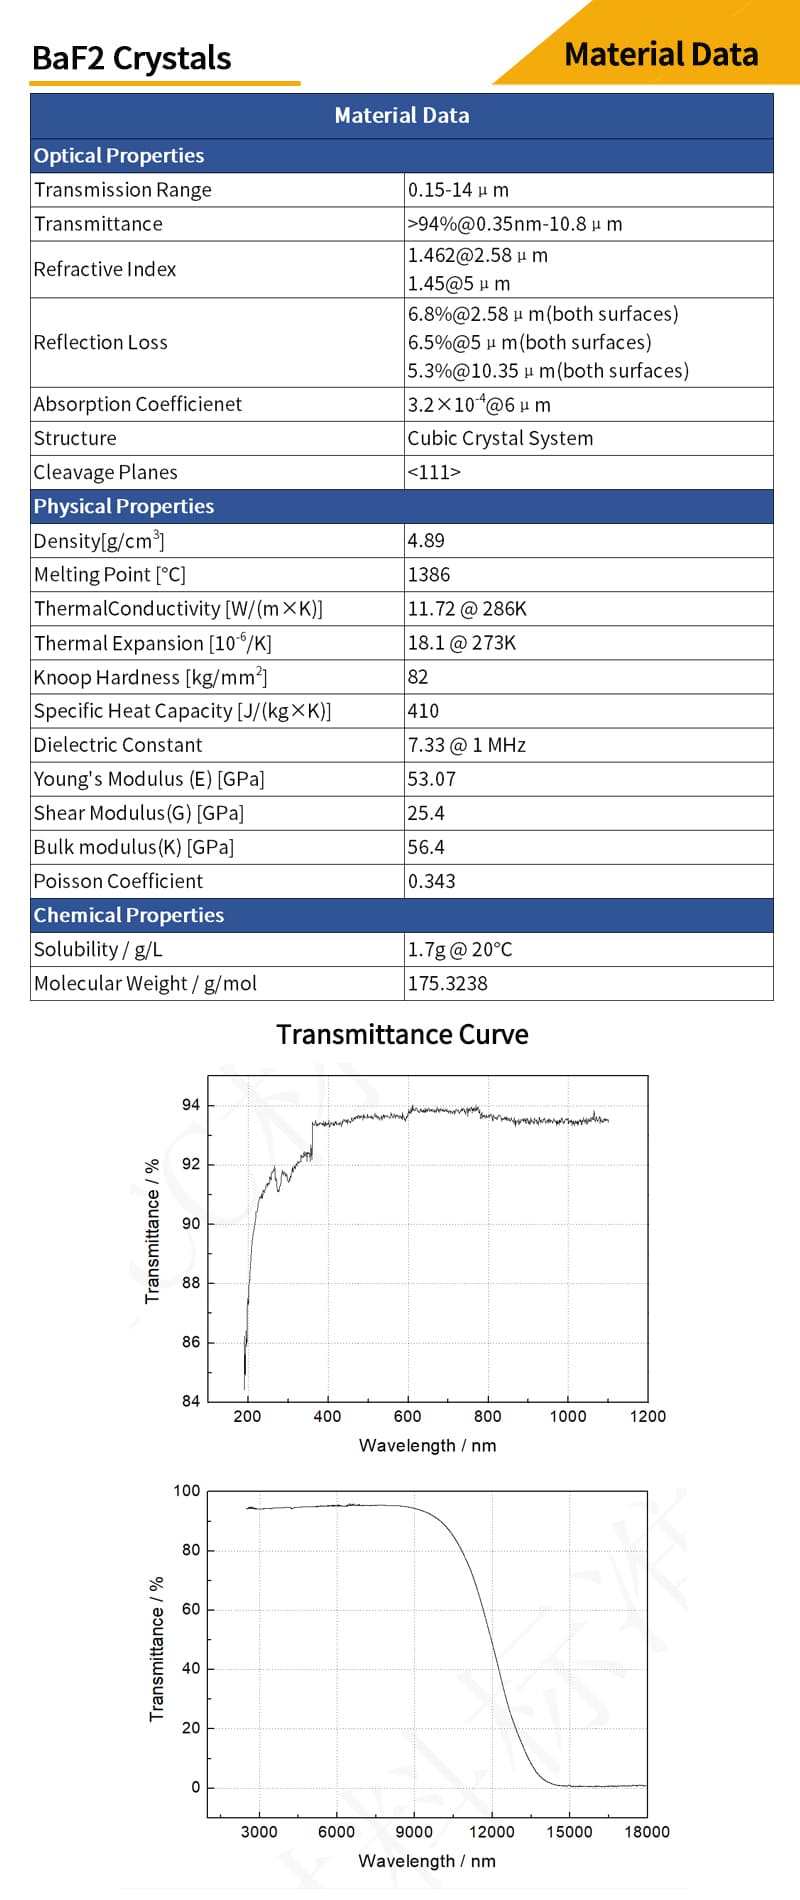 Barium Fluoride plano-concave lenses material data and transmittance curves